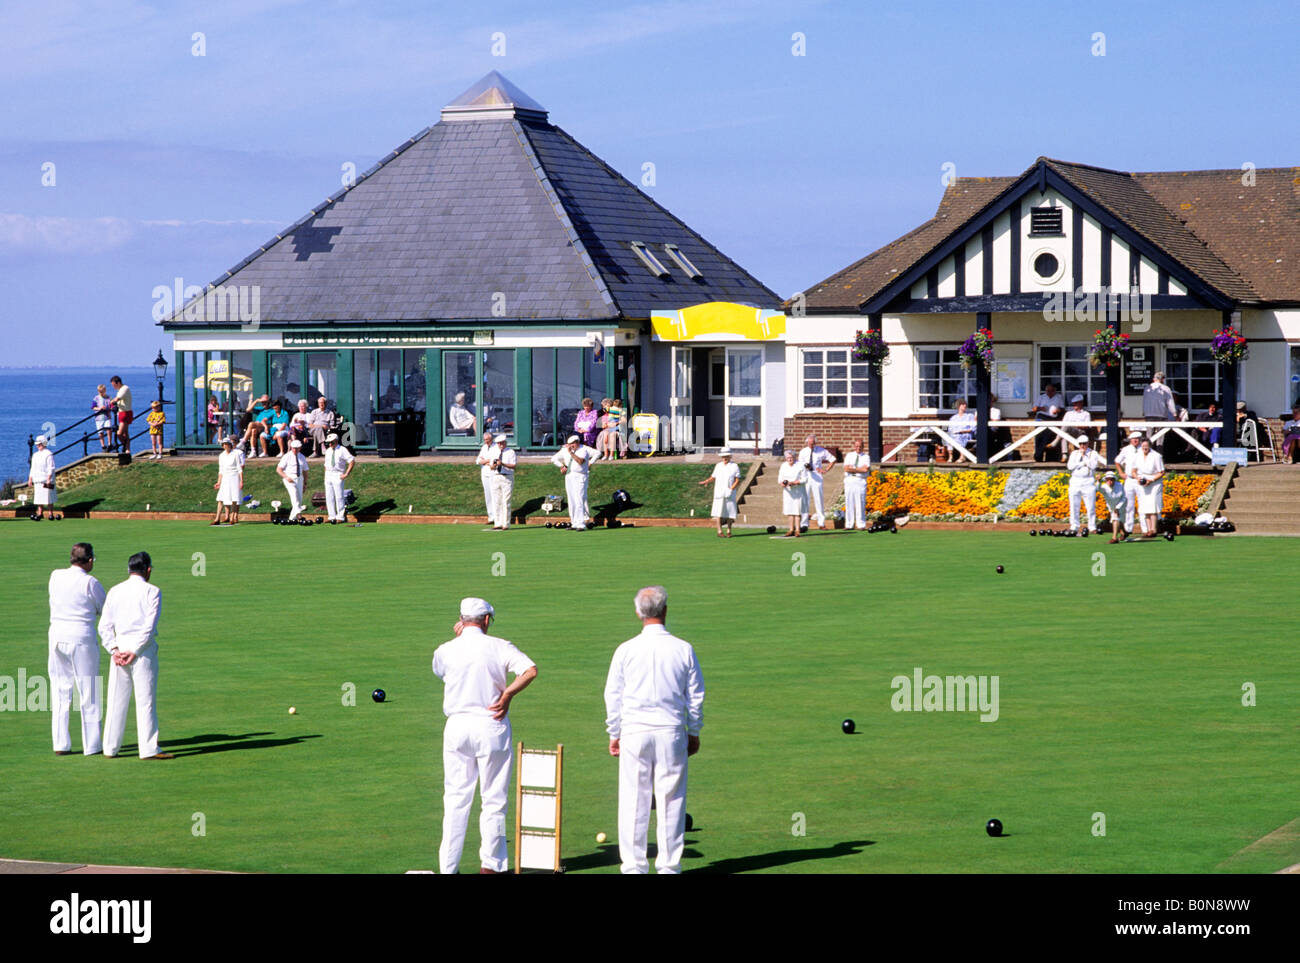 Bowls outdoor bowling green clubhouse whites Hunstanton cliff Norfolk sport game North Sea East Anglia England players playing Stock Photo